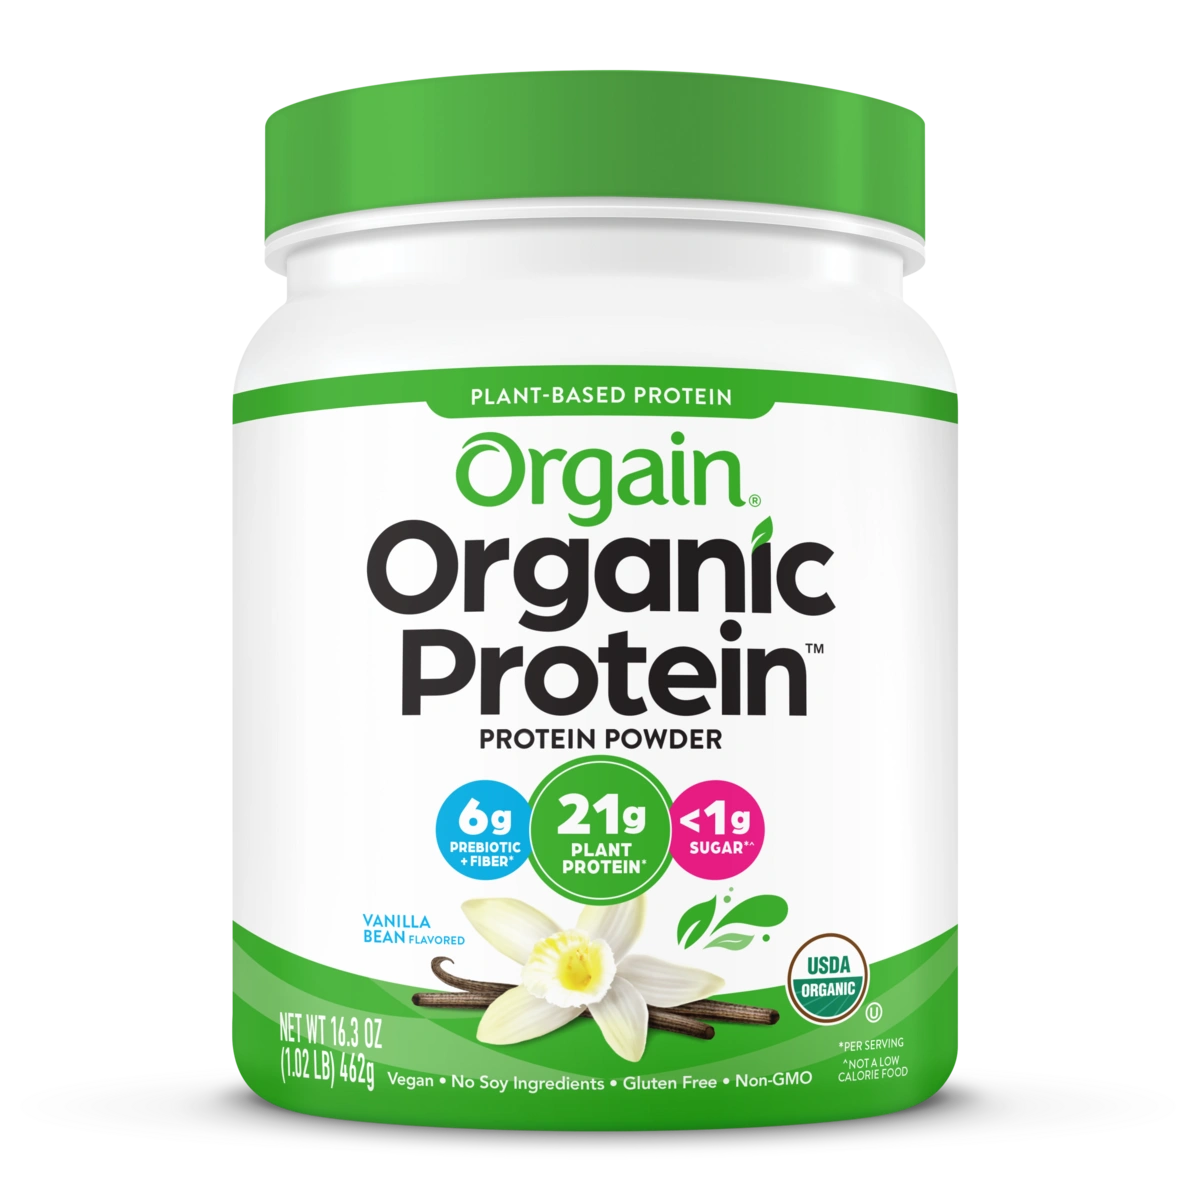 Front of Organic Protein Plant Based Protein Powder - Vanilla Bean Flavor in the 1.02lb Canister Size